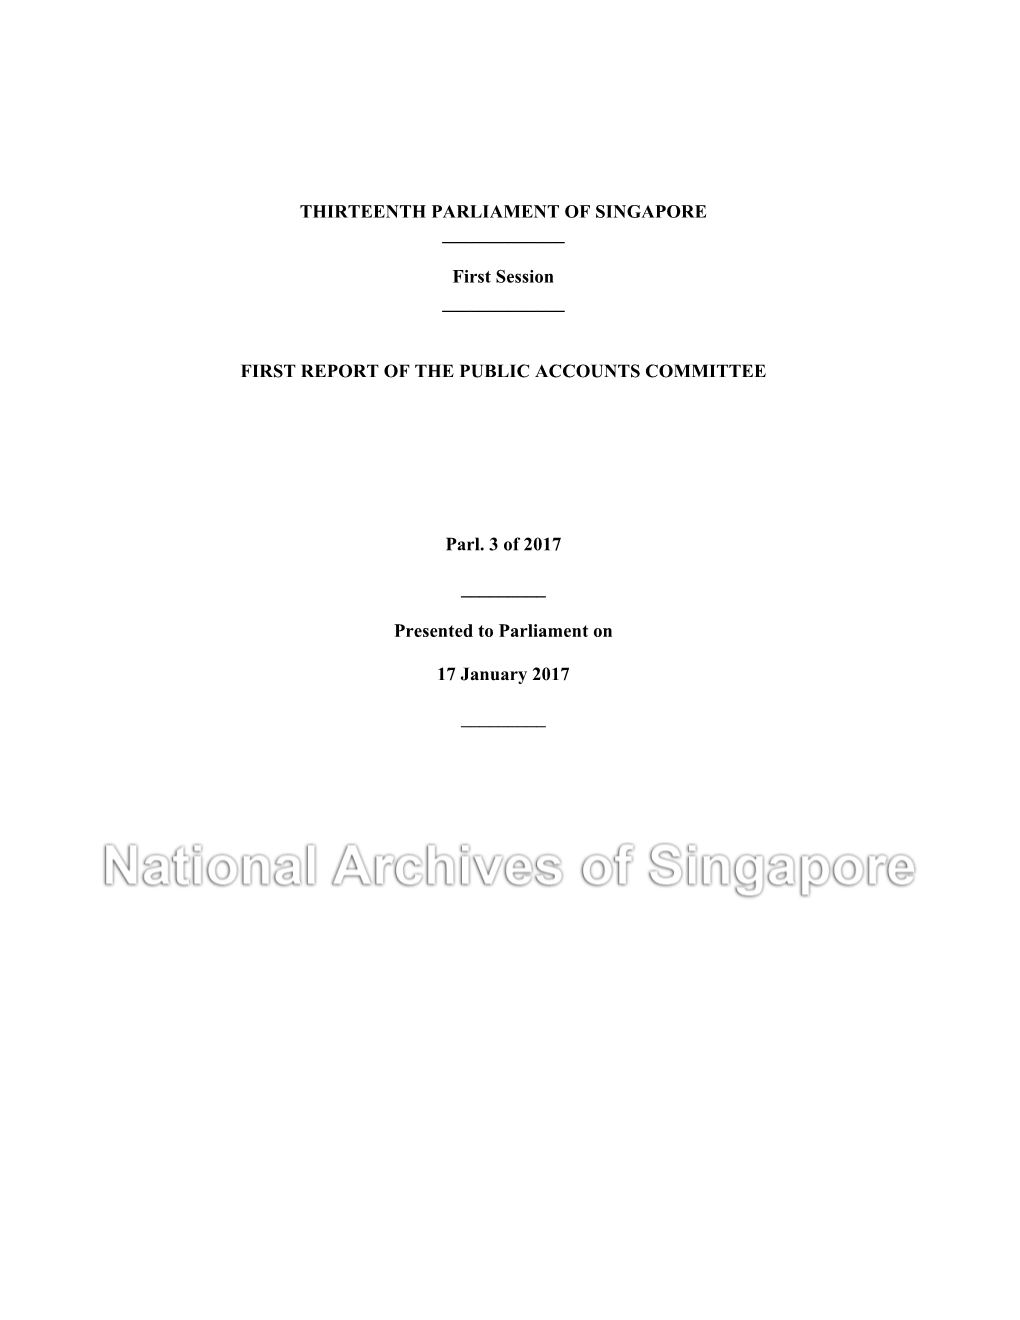 FIRST REPORT of the PUBLIC ACCOUNTS COMMITTEE Parl